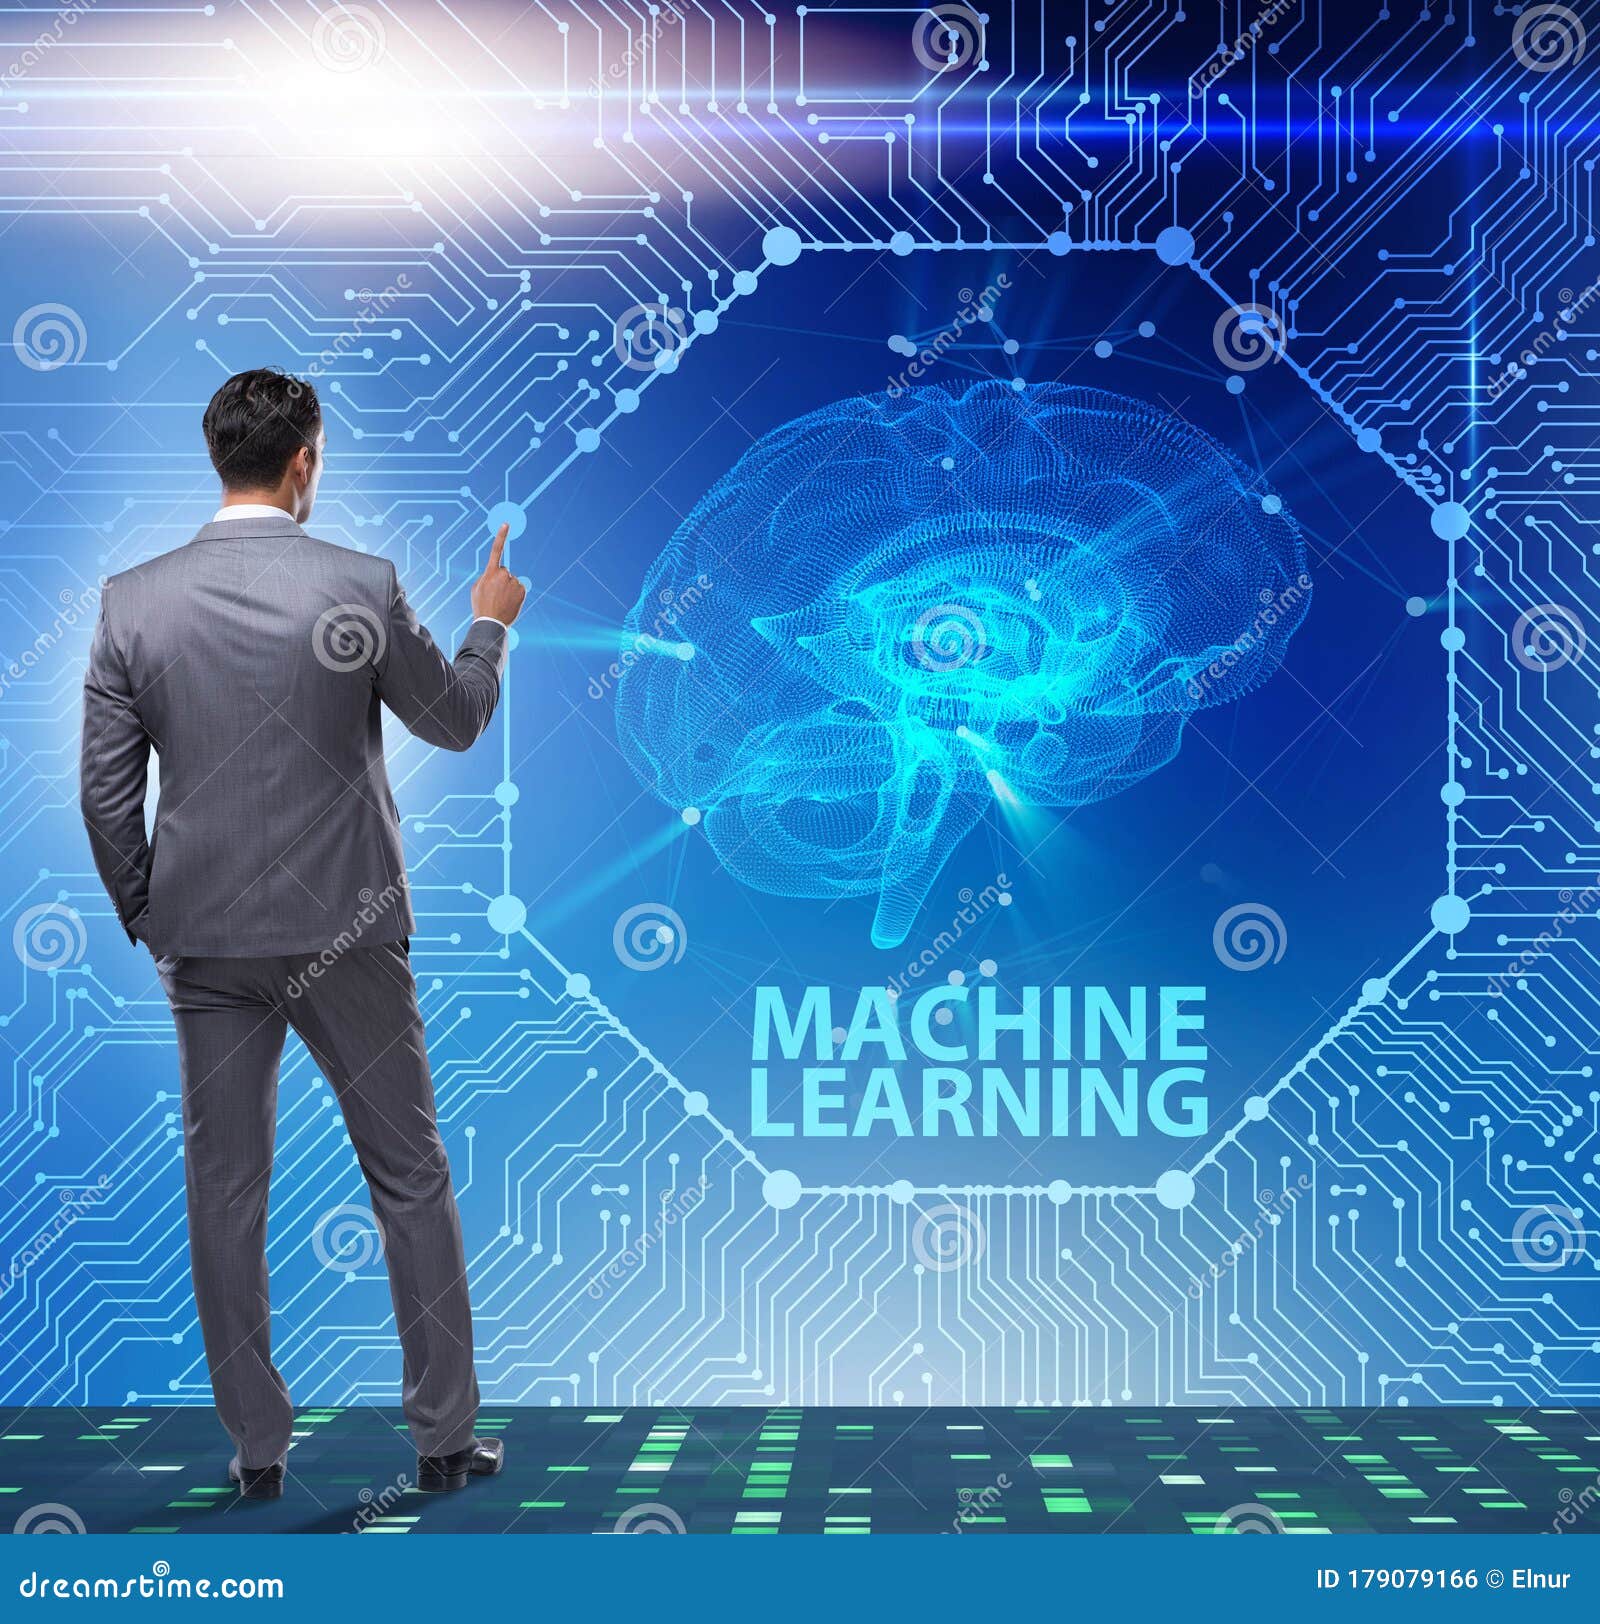 Machine Learning Concept As Modern Technology Stock Photo ...